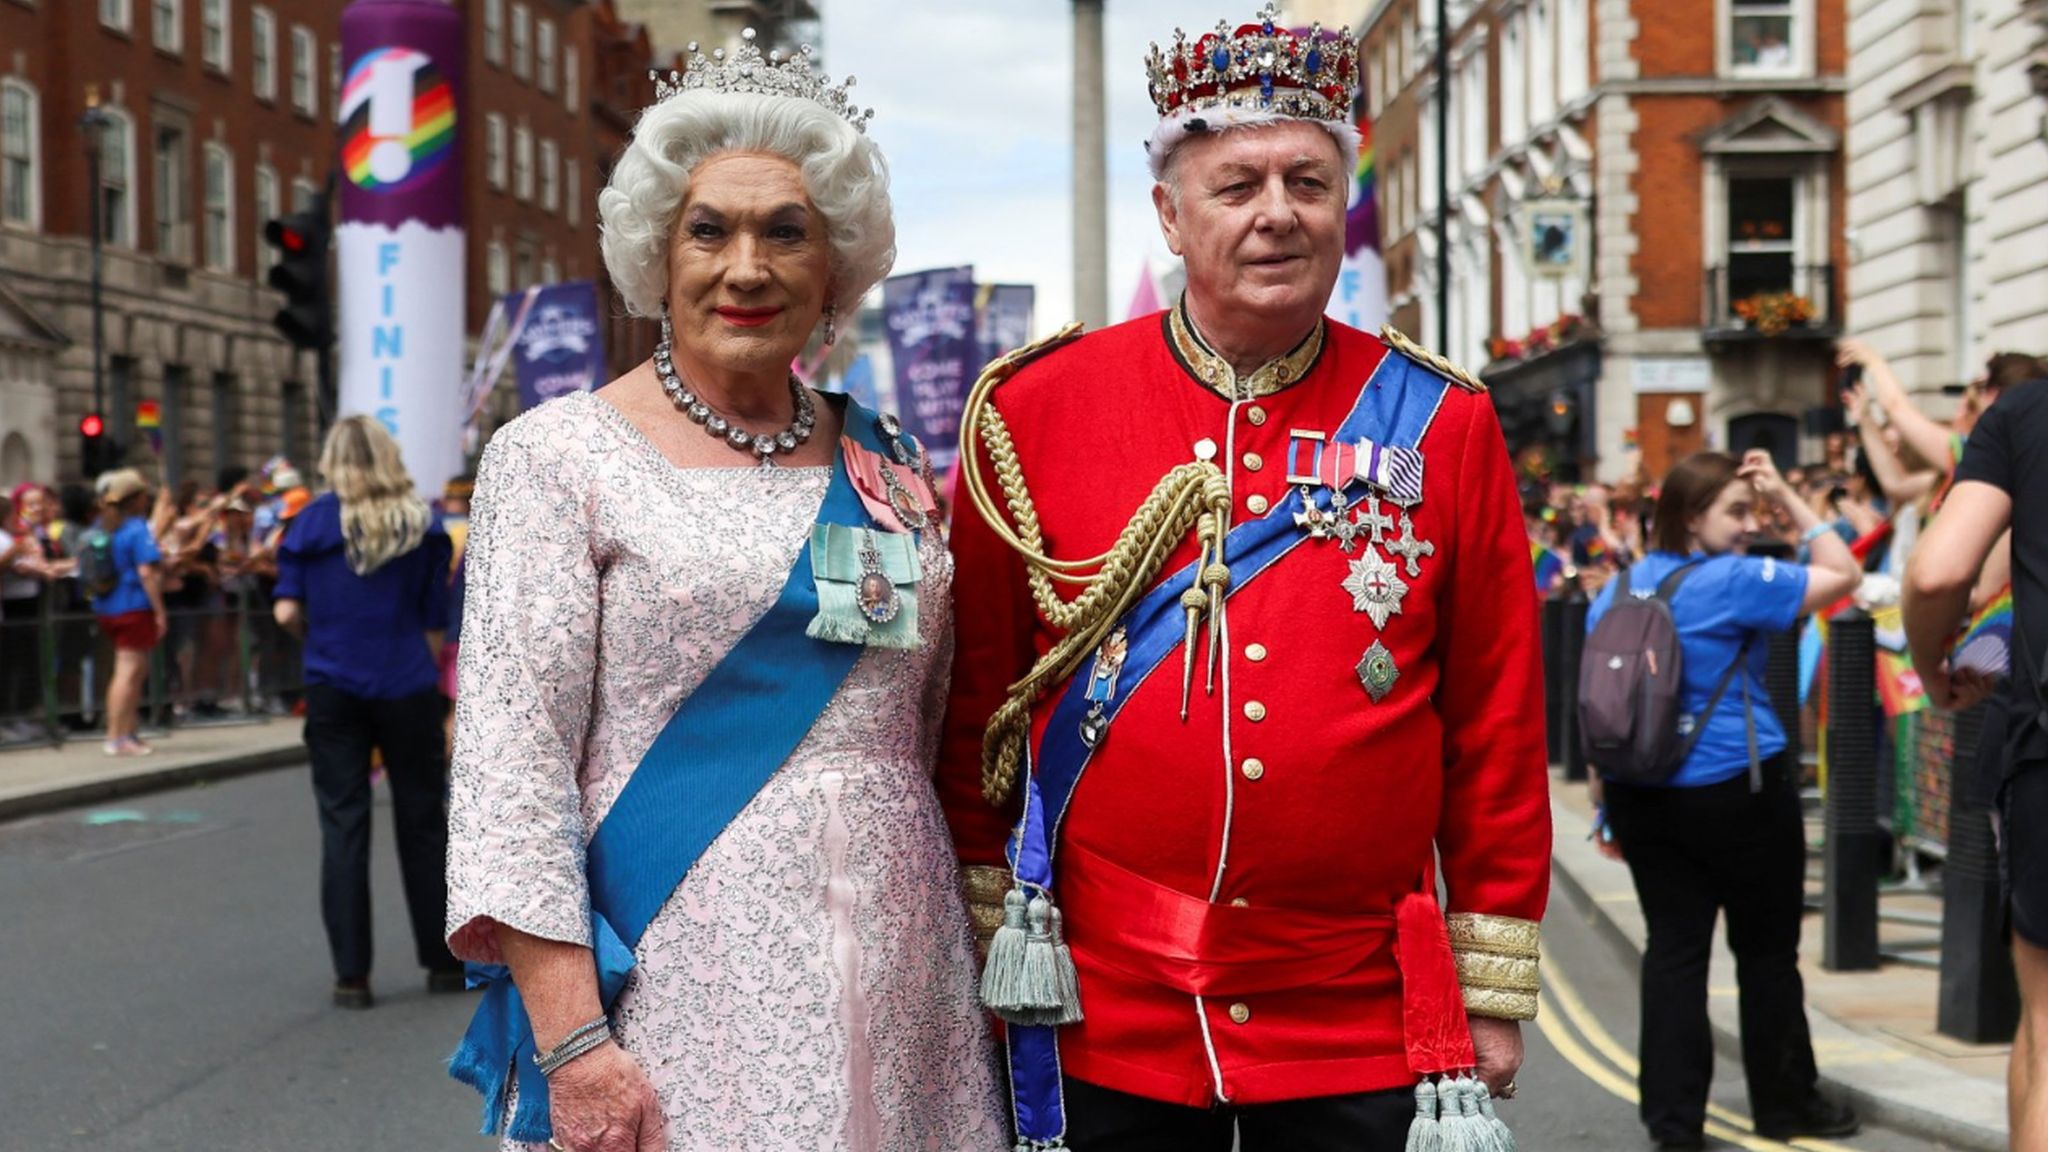 Billie Raymond and Robert Macintosh dressed up as King Charles III and Queen Camilla